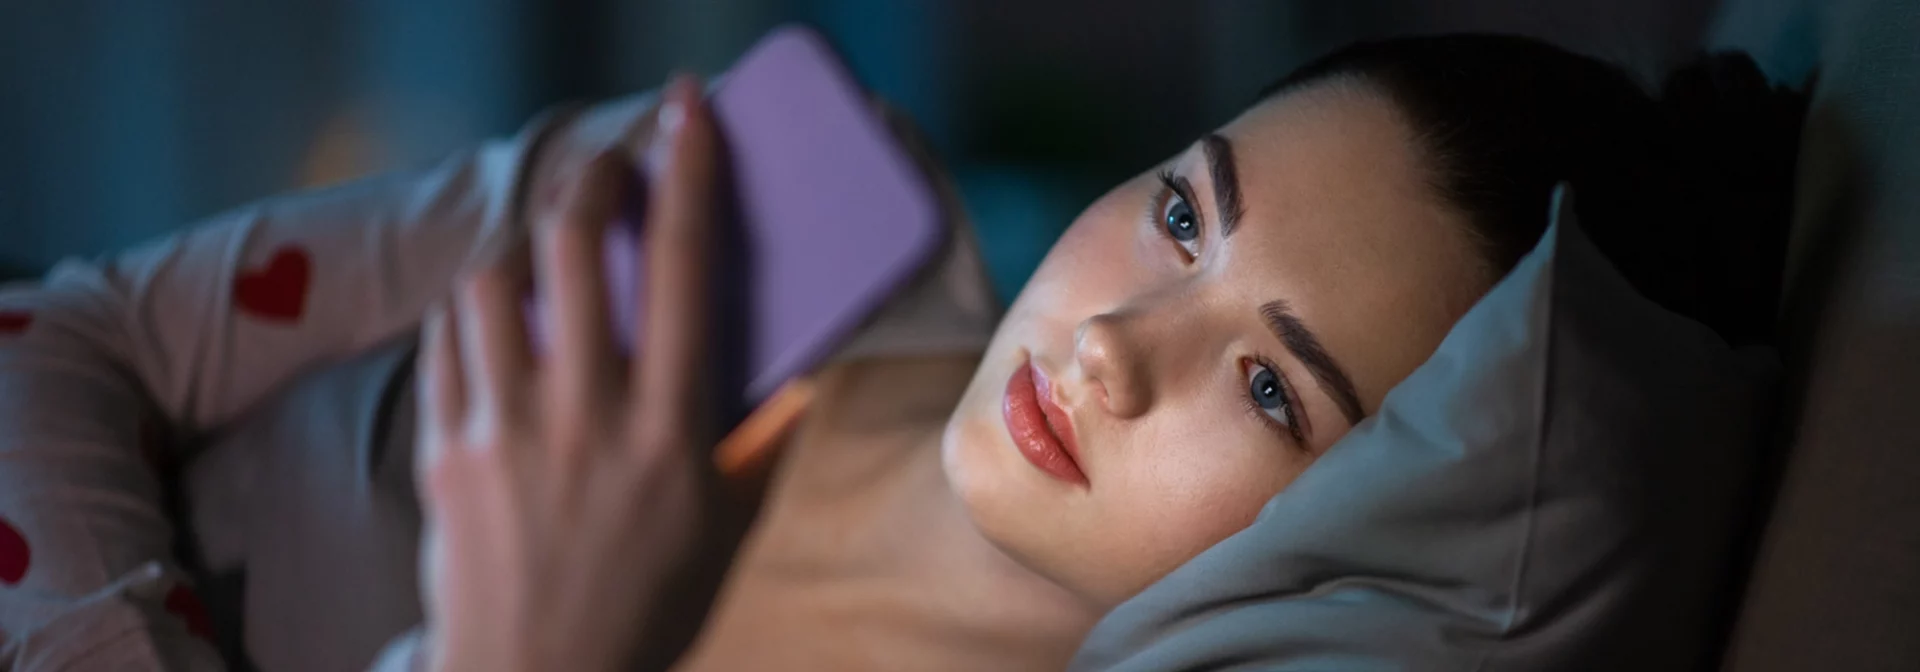 teen laying on bed in dark room on smart phone